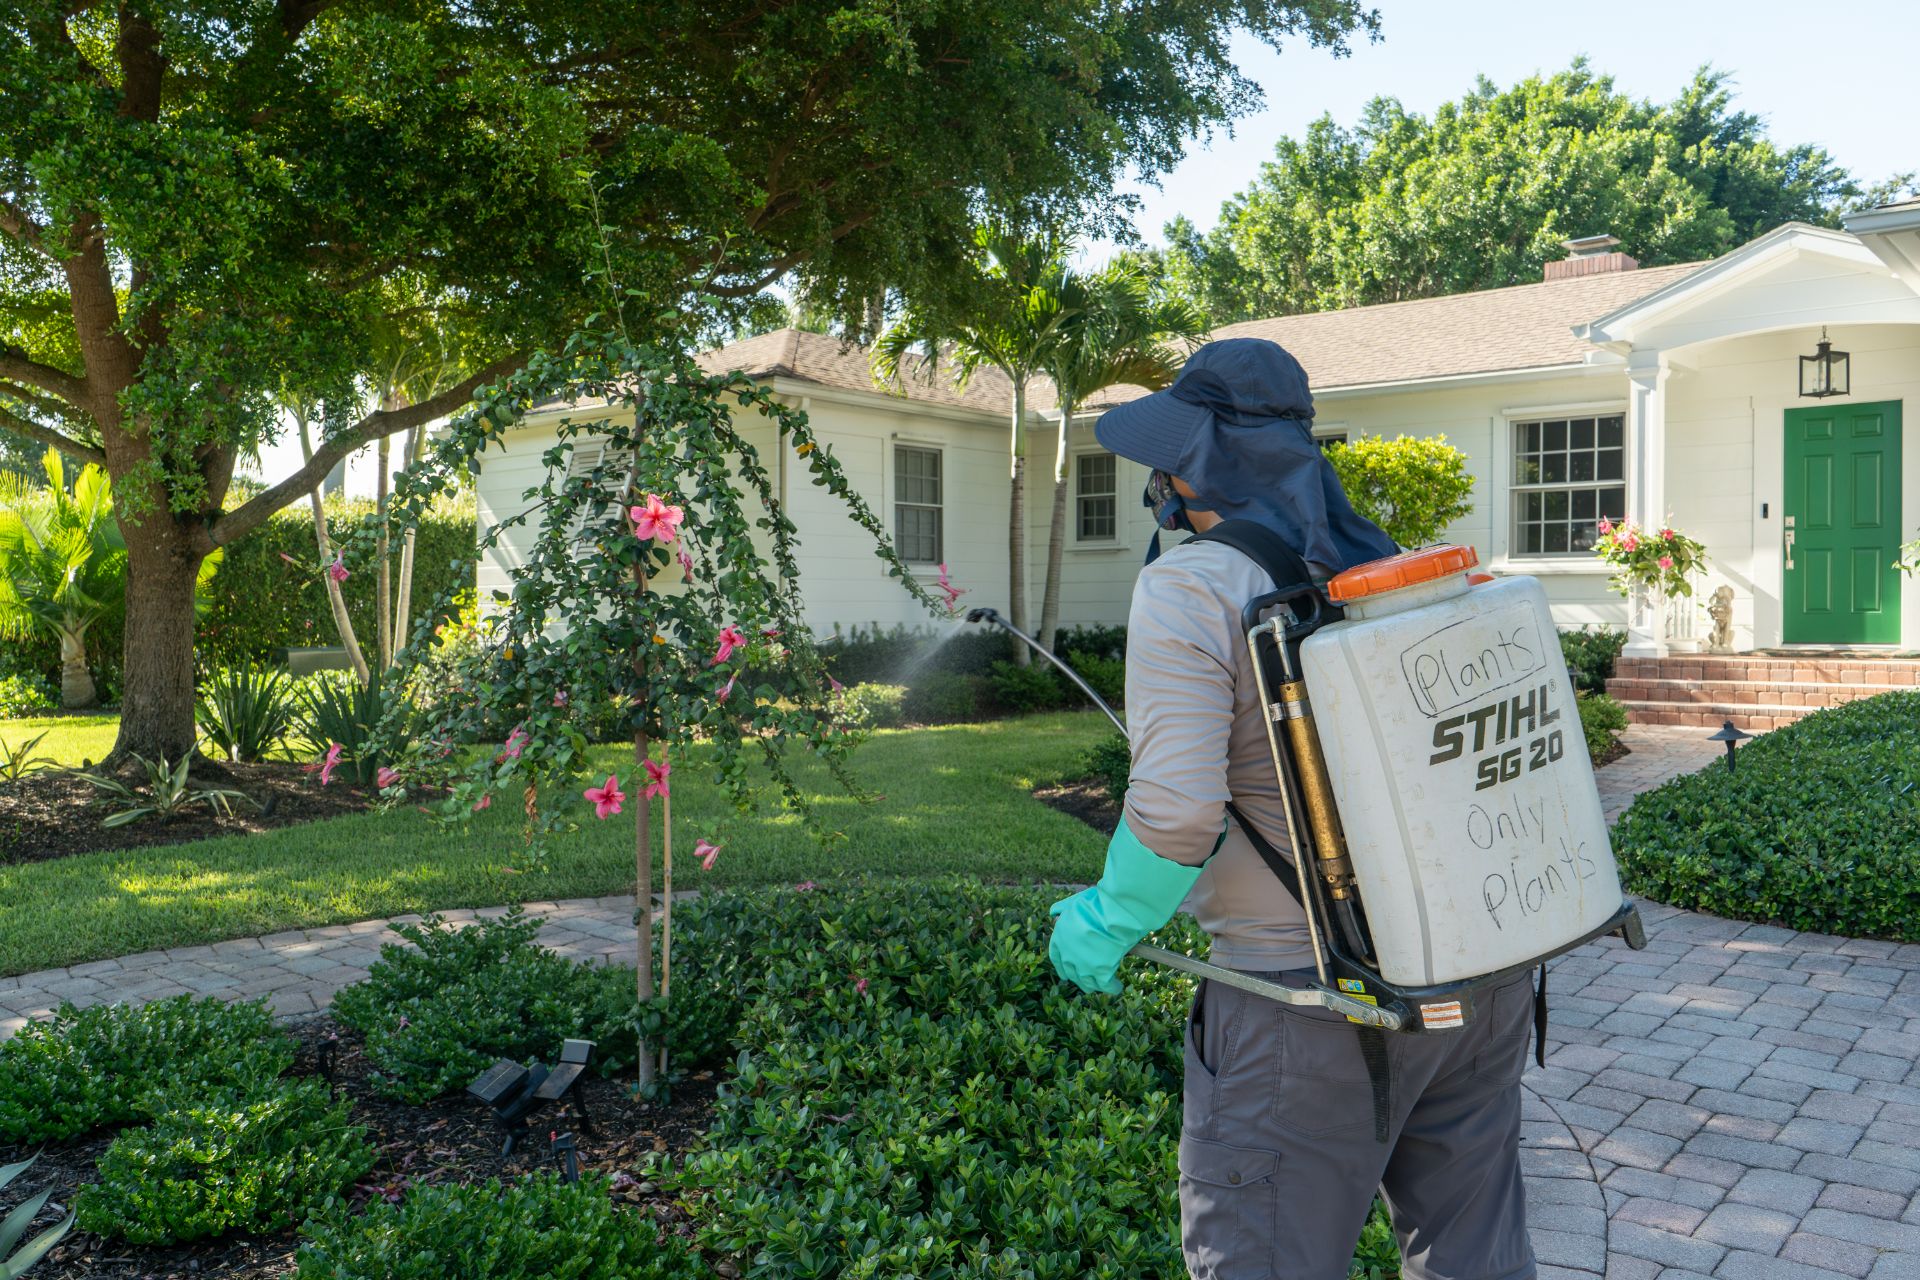 A GreenEdge staff member carefully spraying pesticide on flowers in Sarasota. Our trained professionals use precise techniques to target pests while safeguarding the health of the plants. Trust GreenEdge for responsible pesticide application that preserves the beauty and well-being of your flowers.